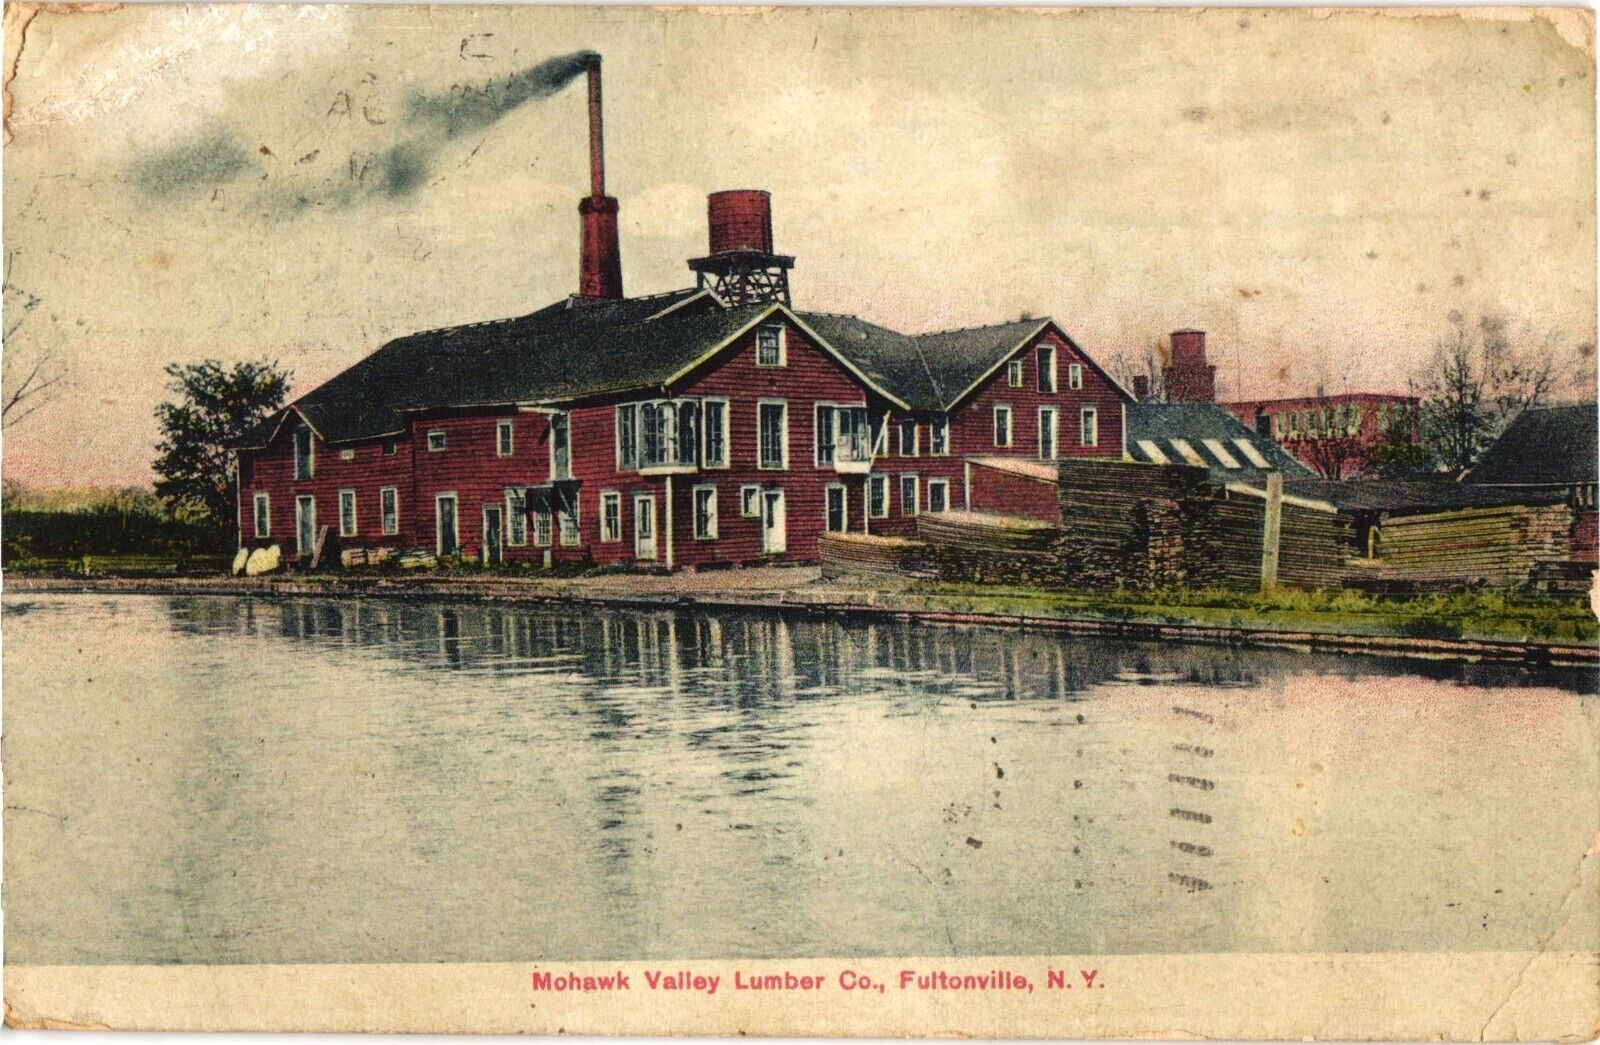 Fultonville New York Mohawk Valley Lumber Co Postcard 1900s Antique Factory